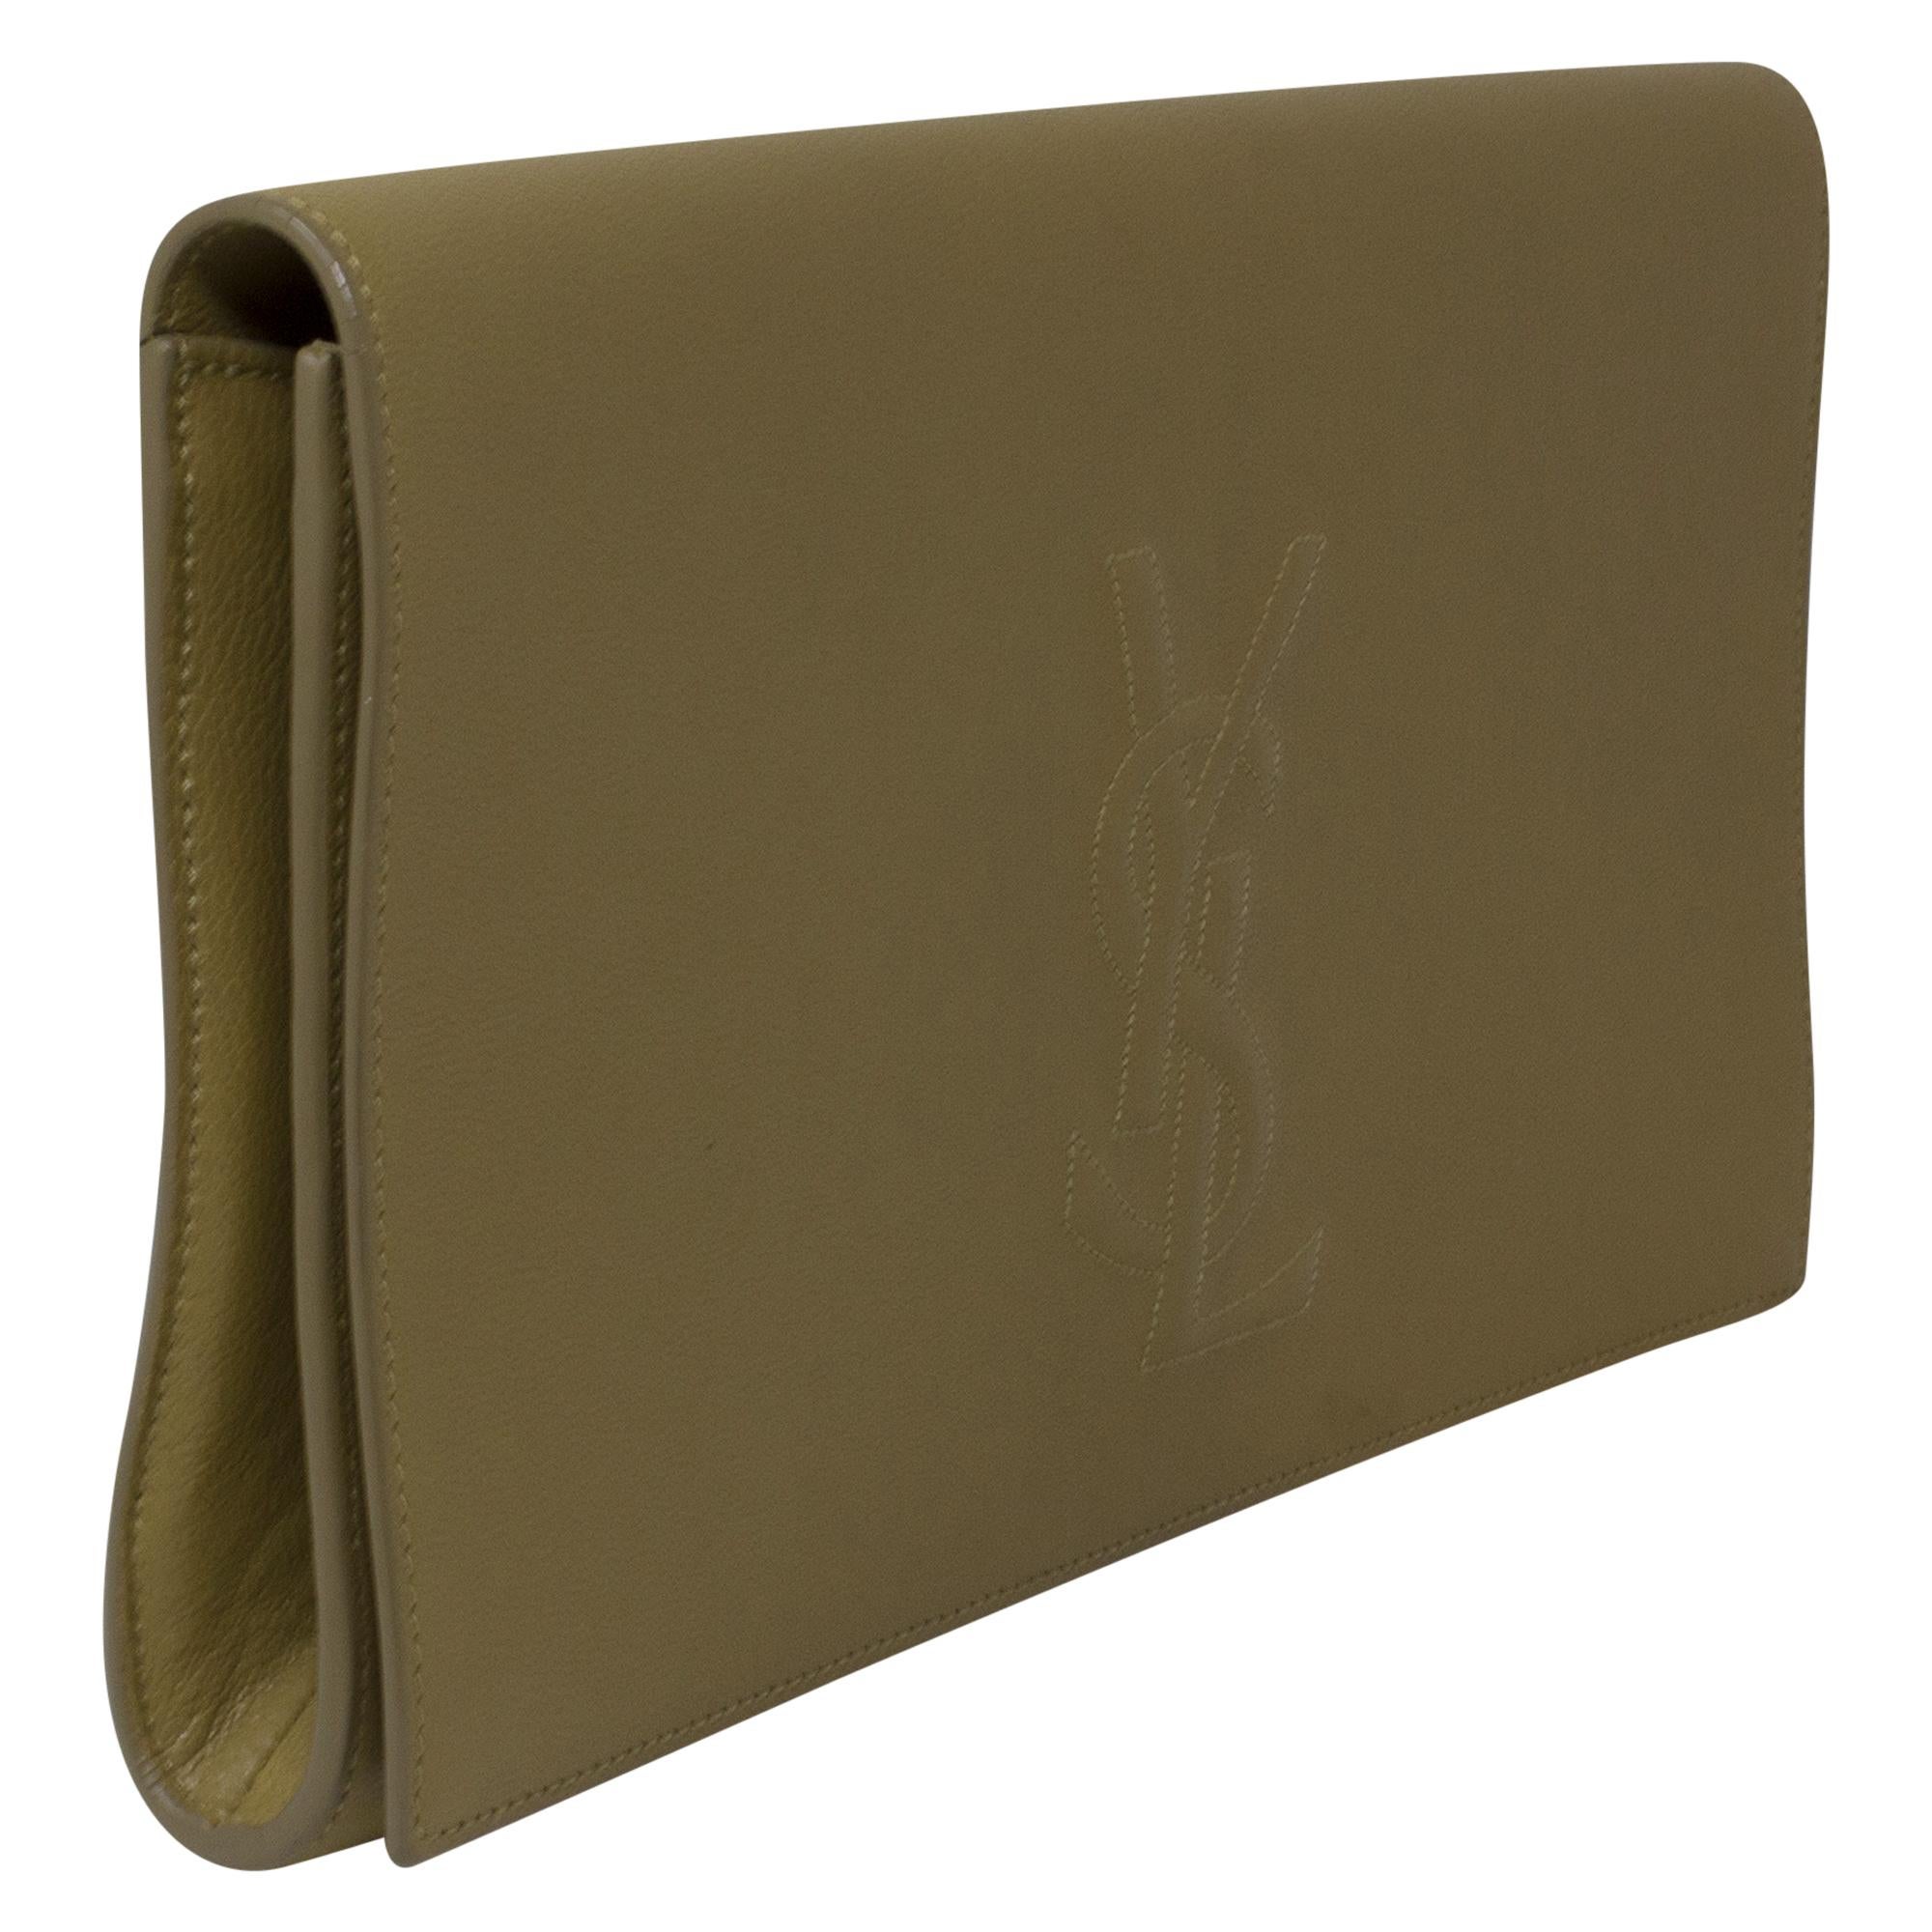 Introducing the Yves Saint Laurent Beige Patent Clutch, a chic and versatile accessory for the modern woman. Crafted from luxurious beige patent leather, this clutch exudes understated elegance and sophistication. With its sleek design and silver